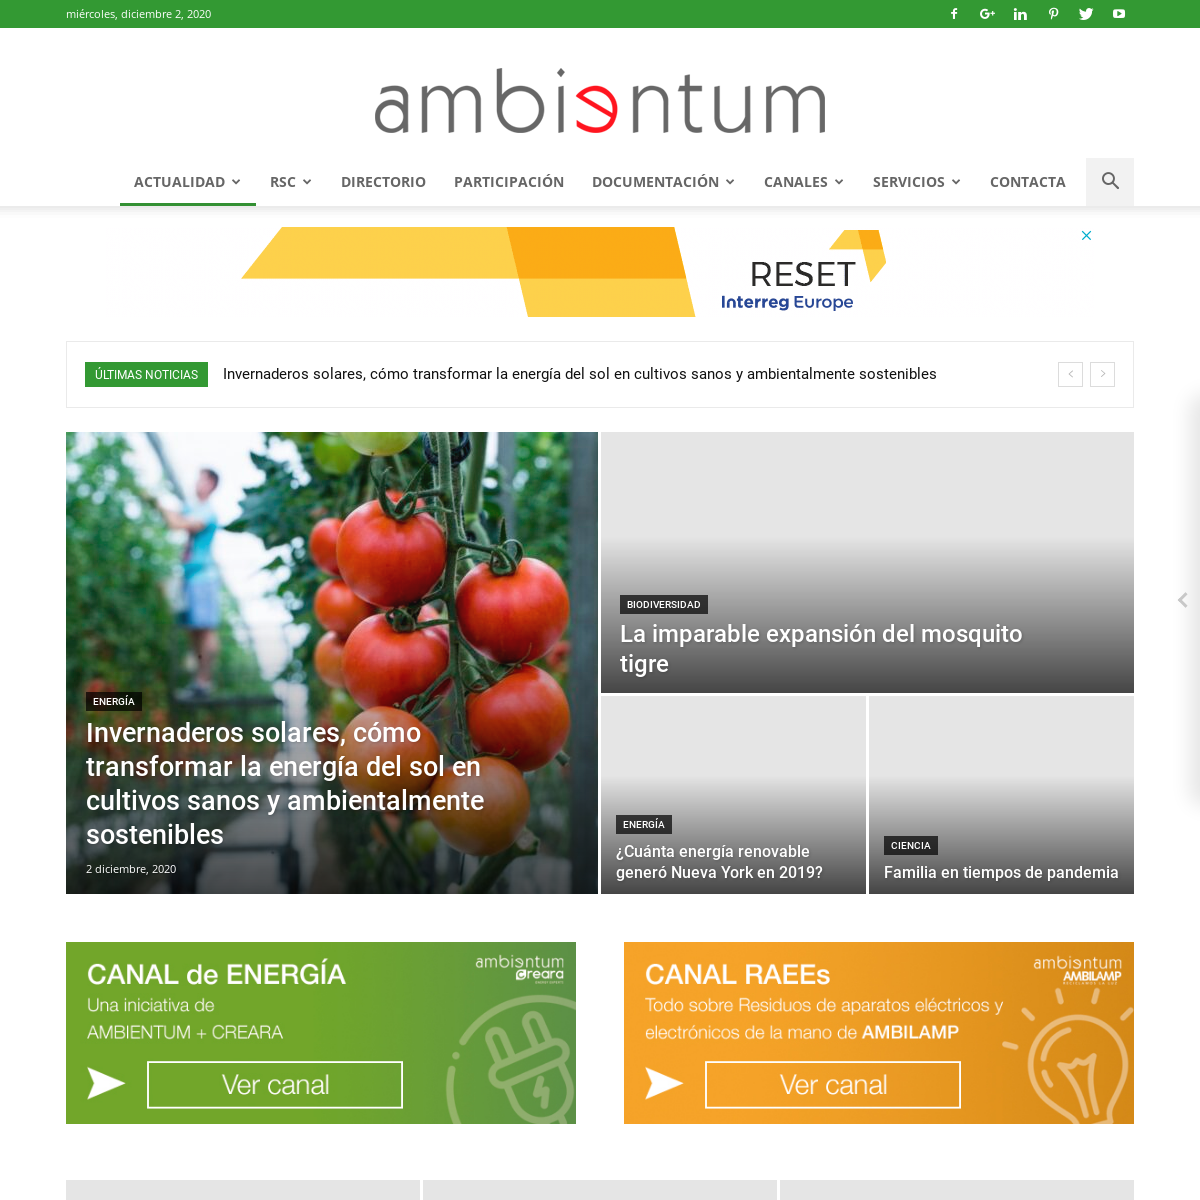 A complete backup of ambientum.com